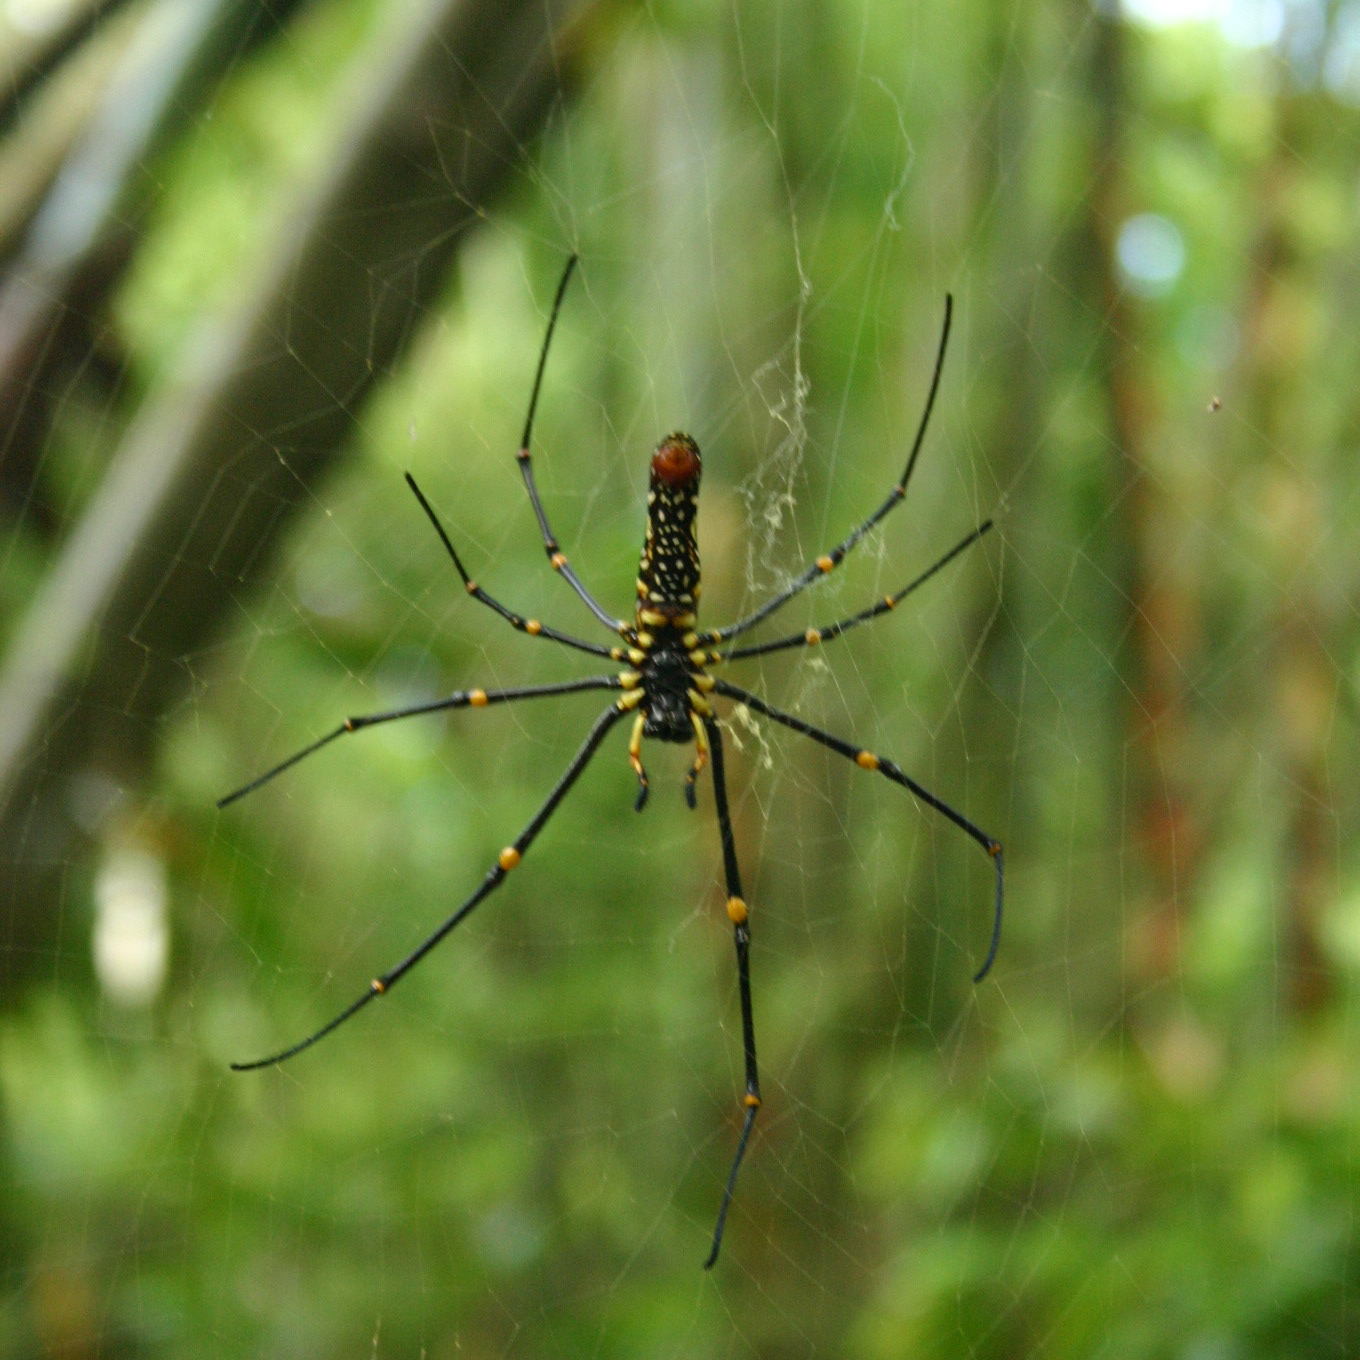 Large spider from Lawachara National Park; a hub of biodiversity in north-east Bangladesh